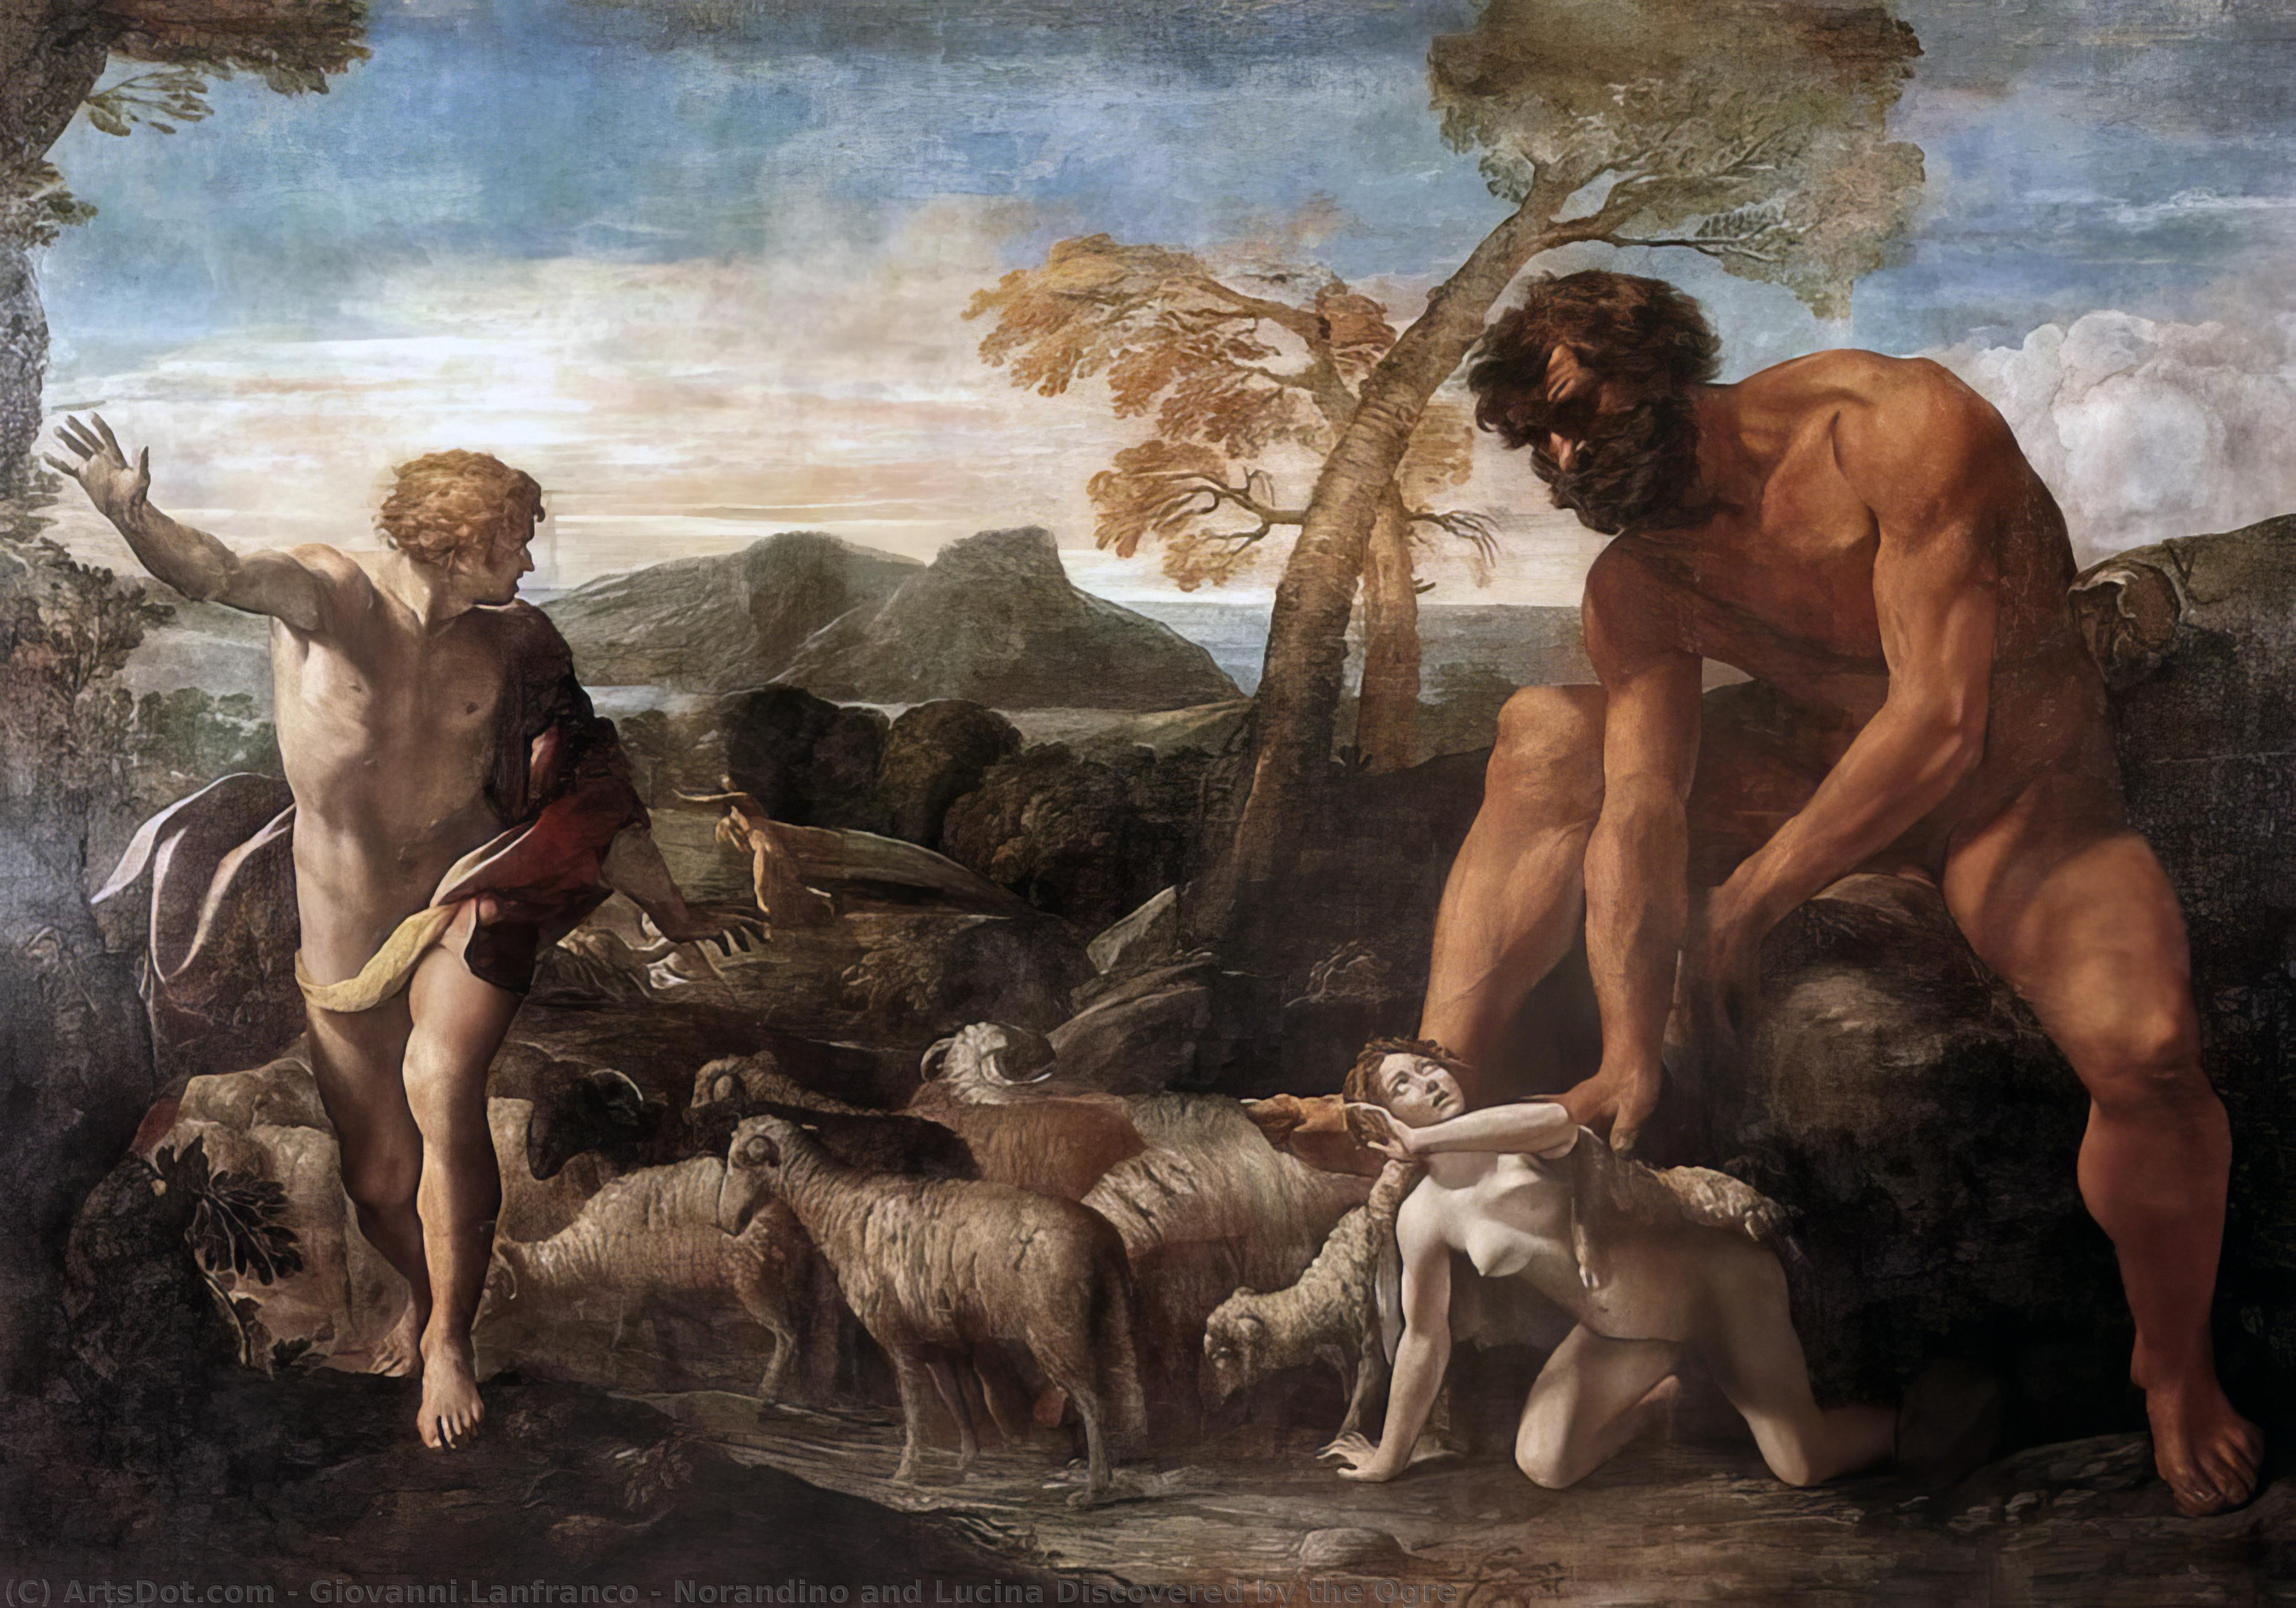 Buy Museum Art Reproductions Norandino and Lucina Discovered by the Ogre, 1624 by Giovanni Lanfranco (1582-1647, Italy) | ArtsDot.com